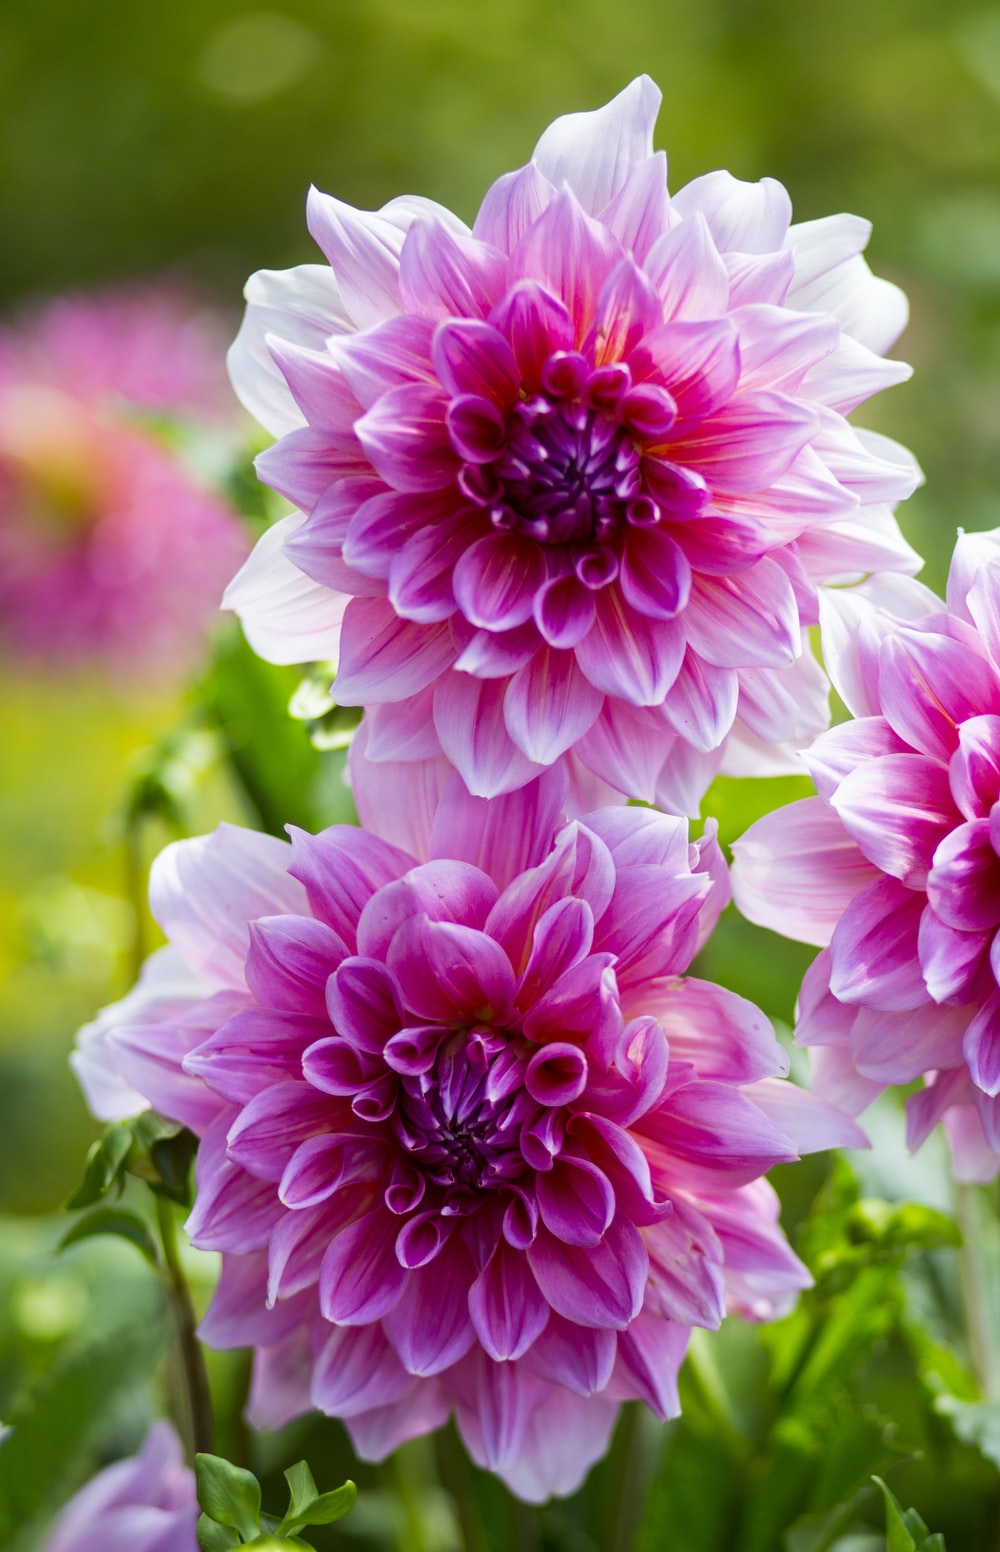 Good Morning Flower Image Free Download. Download Free Picture